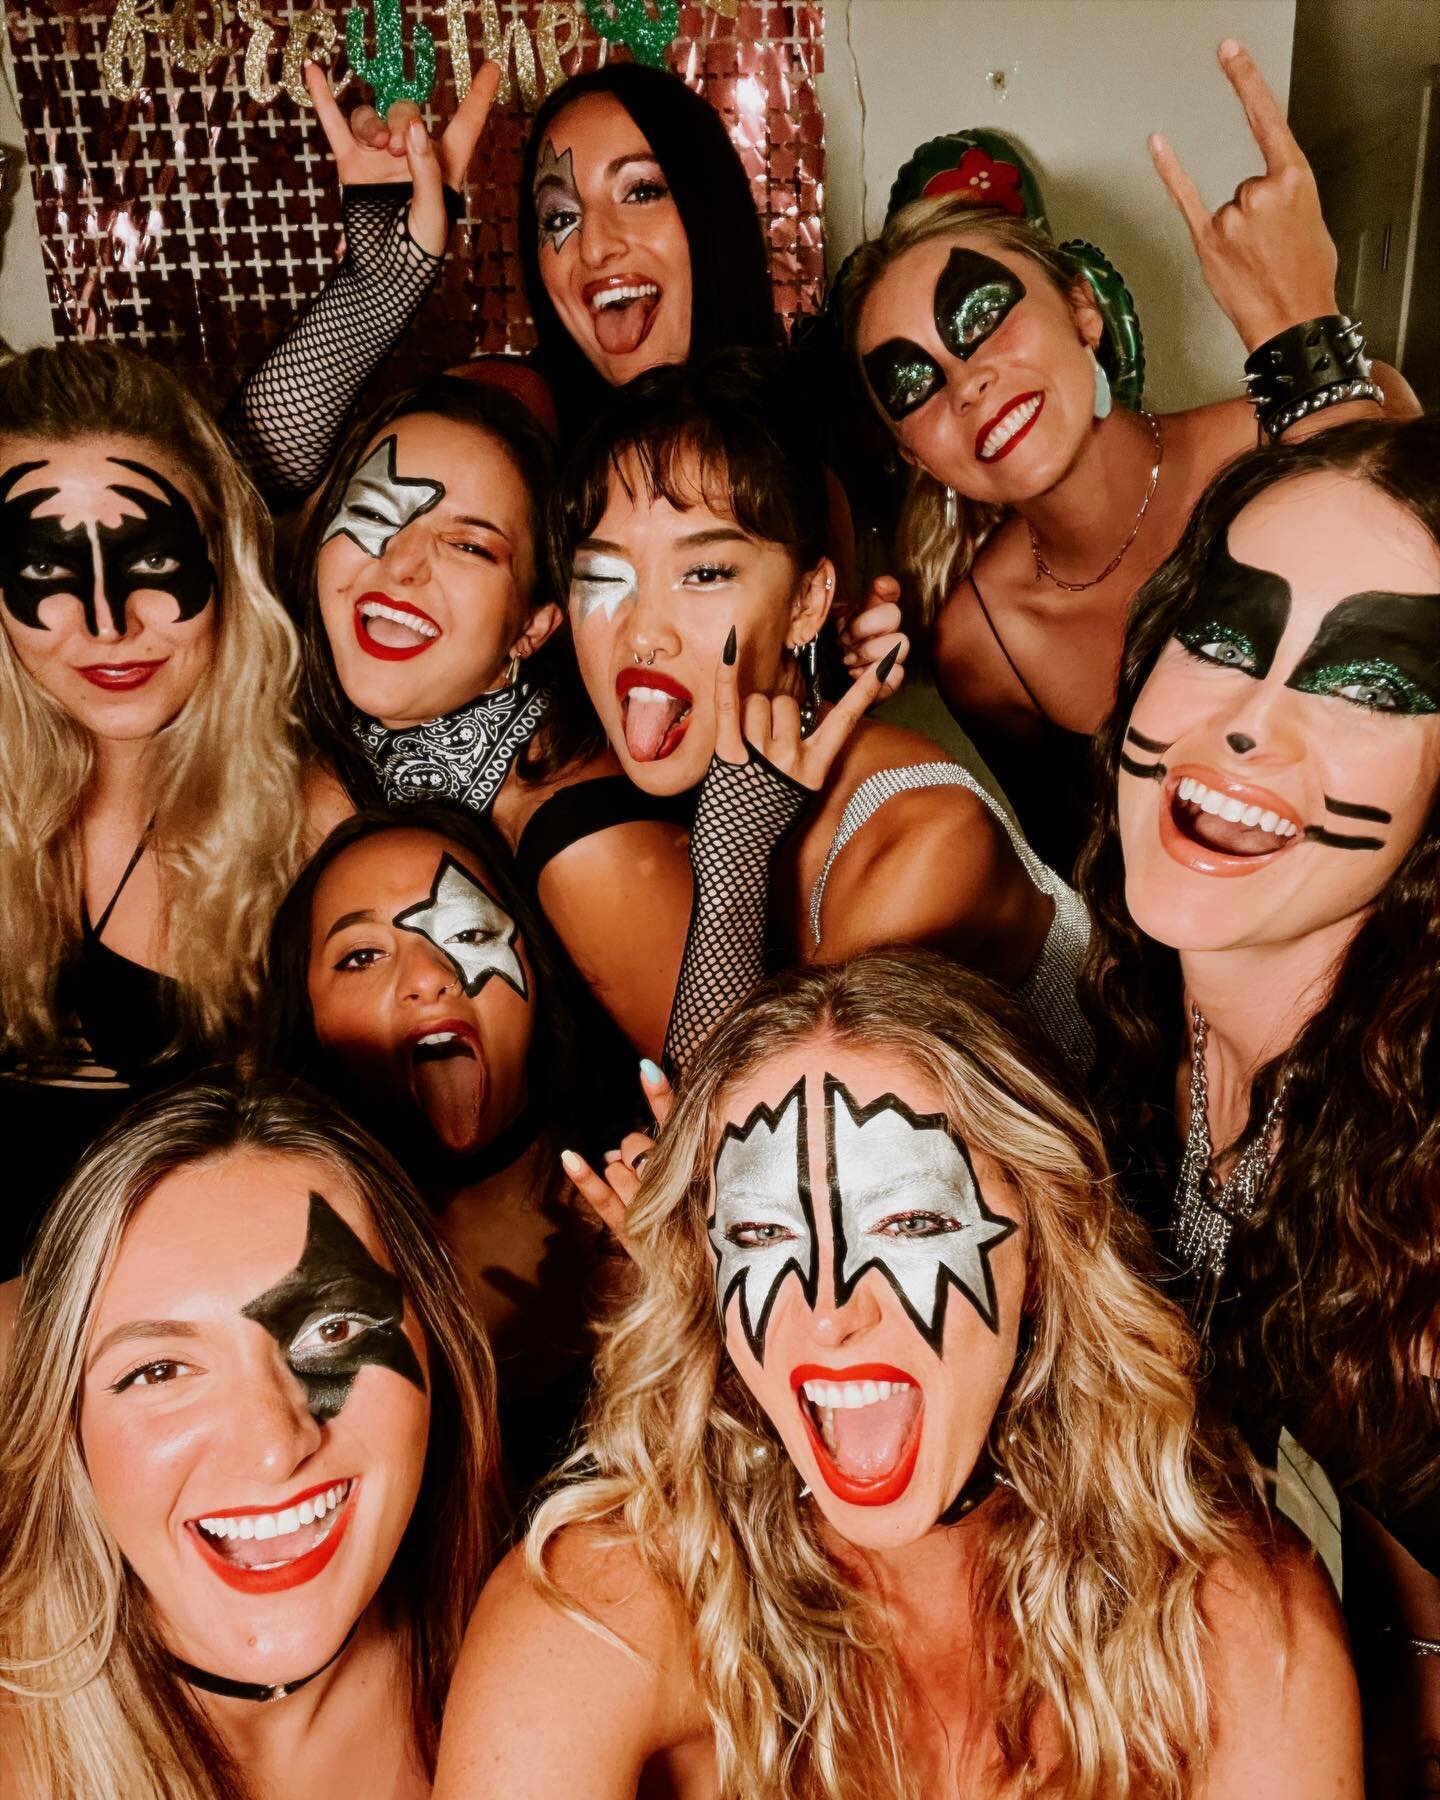 🤘🏻&hearts;️⚡️KISS THE BRIDE ⚡️&hearts;️ 🤘🏻I&rsquo;m so glad I have friends that are willing to go this wild for me!!! I love you all so much!!! This was seriously the weekend of my wildest dreams!!!